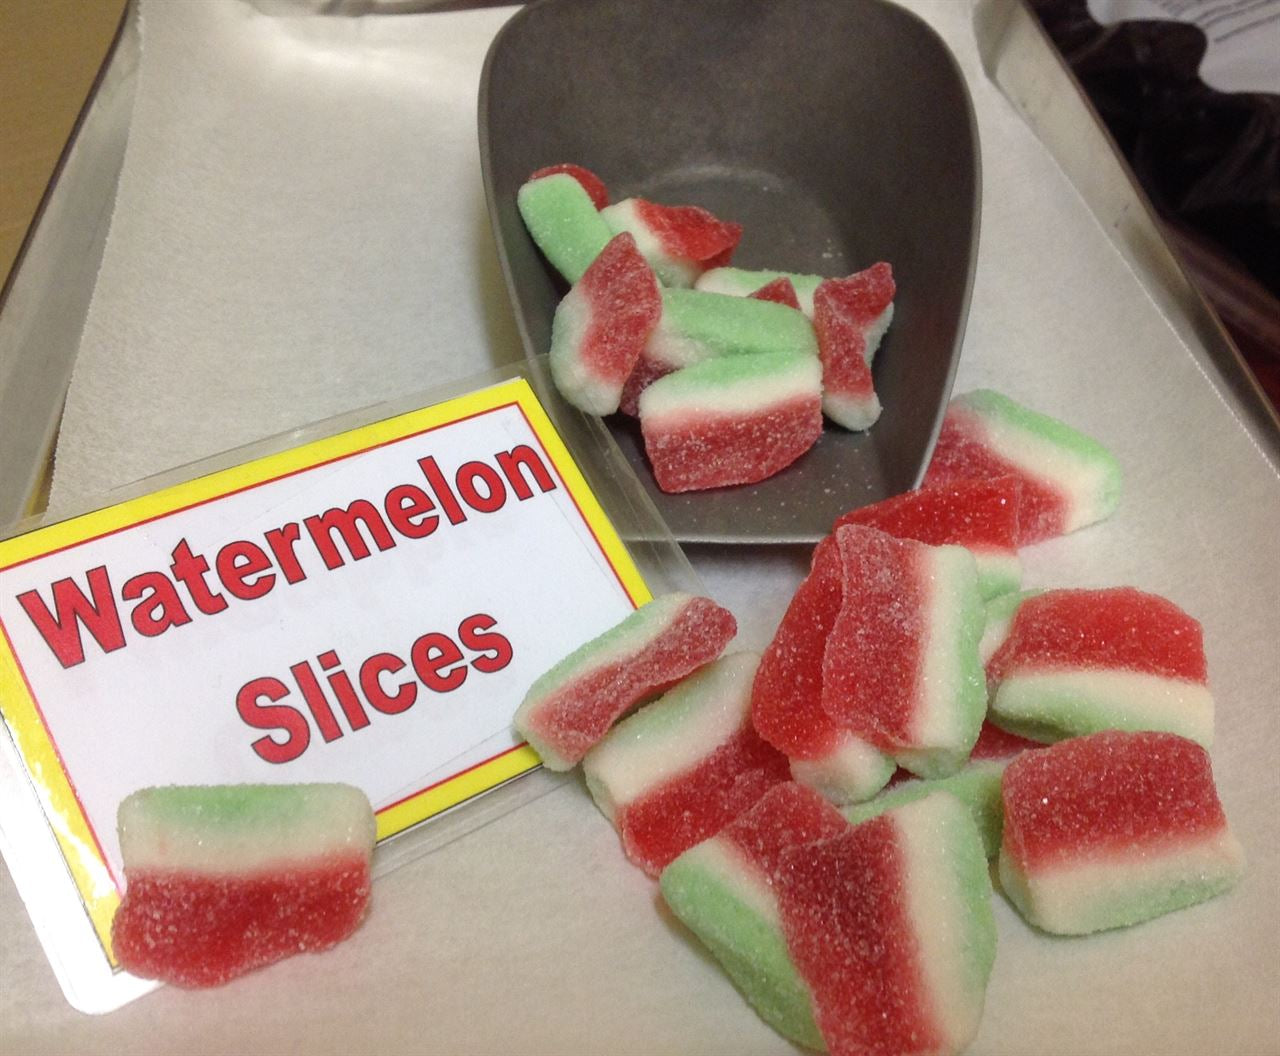 Picture of Watermelon Slices - (Kingsway)